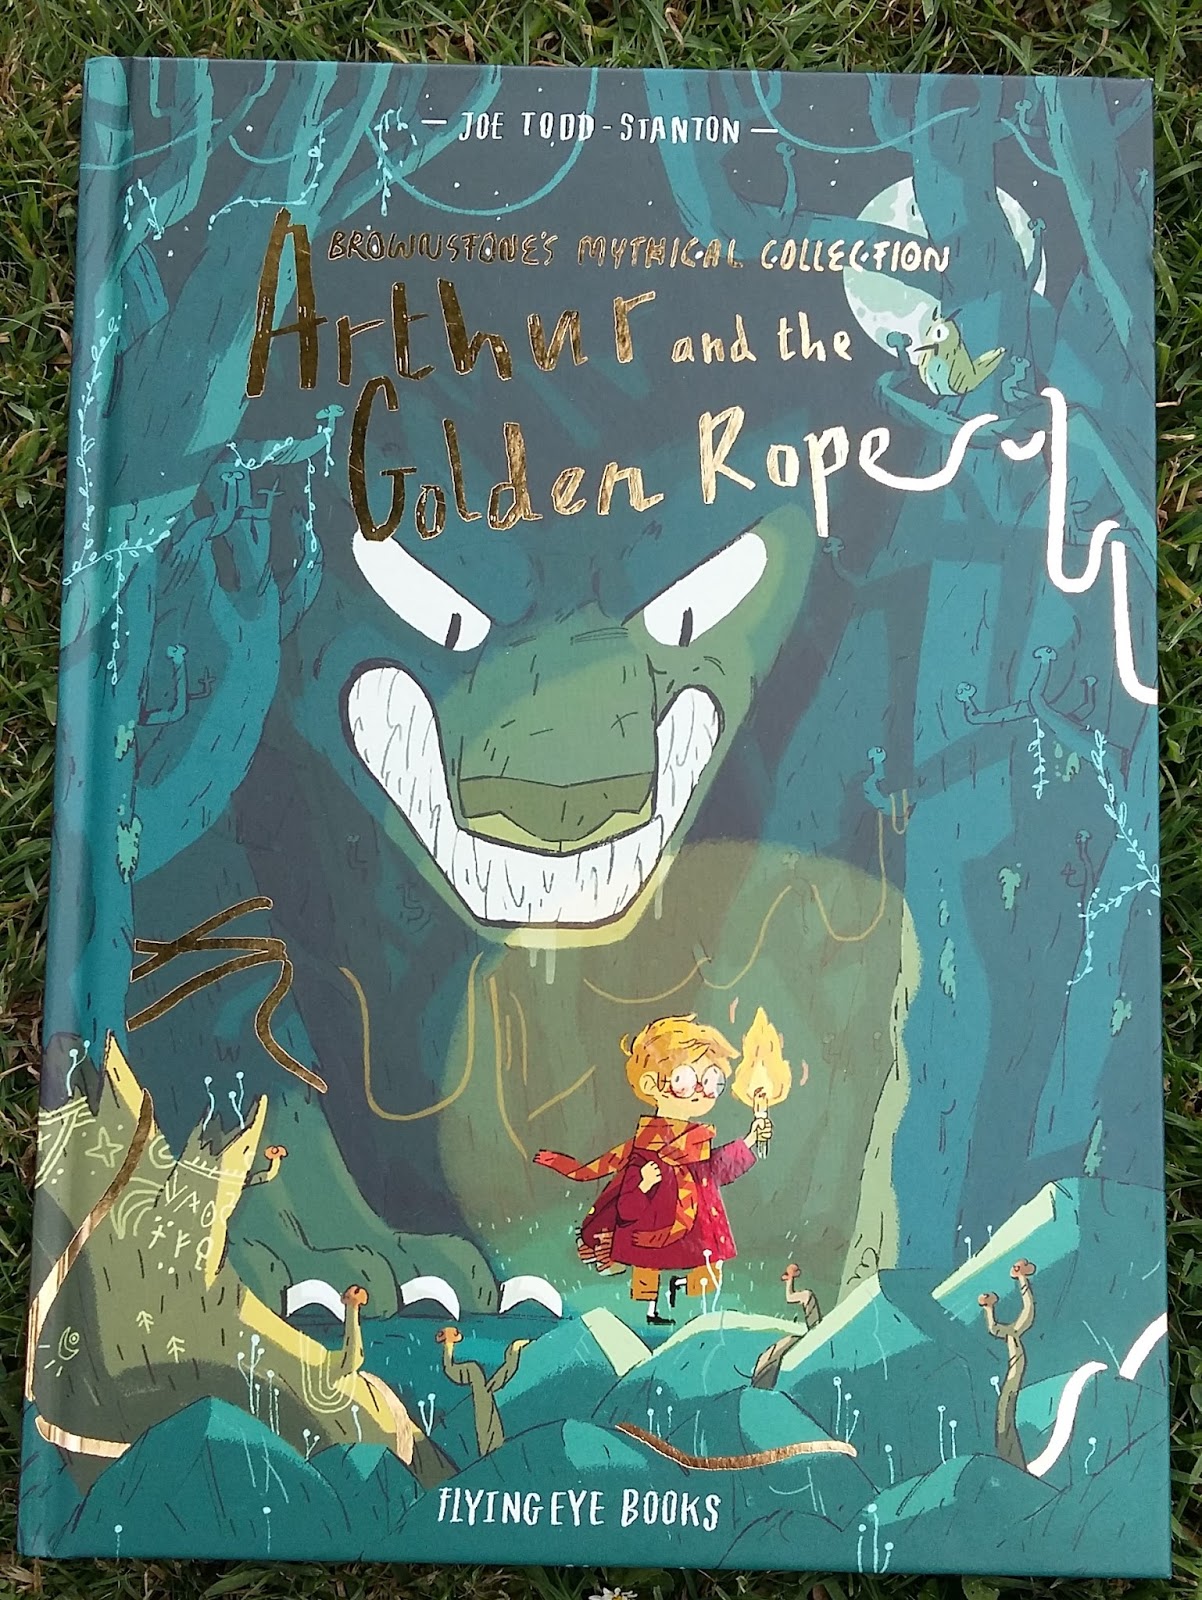 1 Arthur and the Golden Rope Brownstone's Mythical Collection, 1 